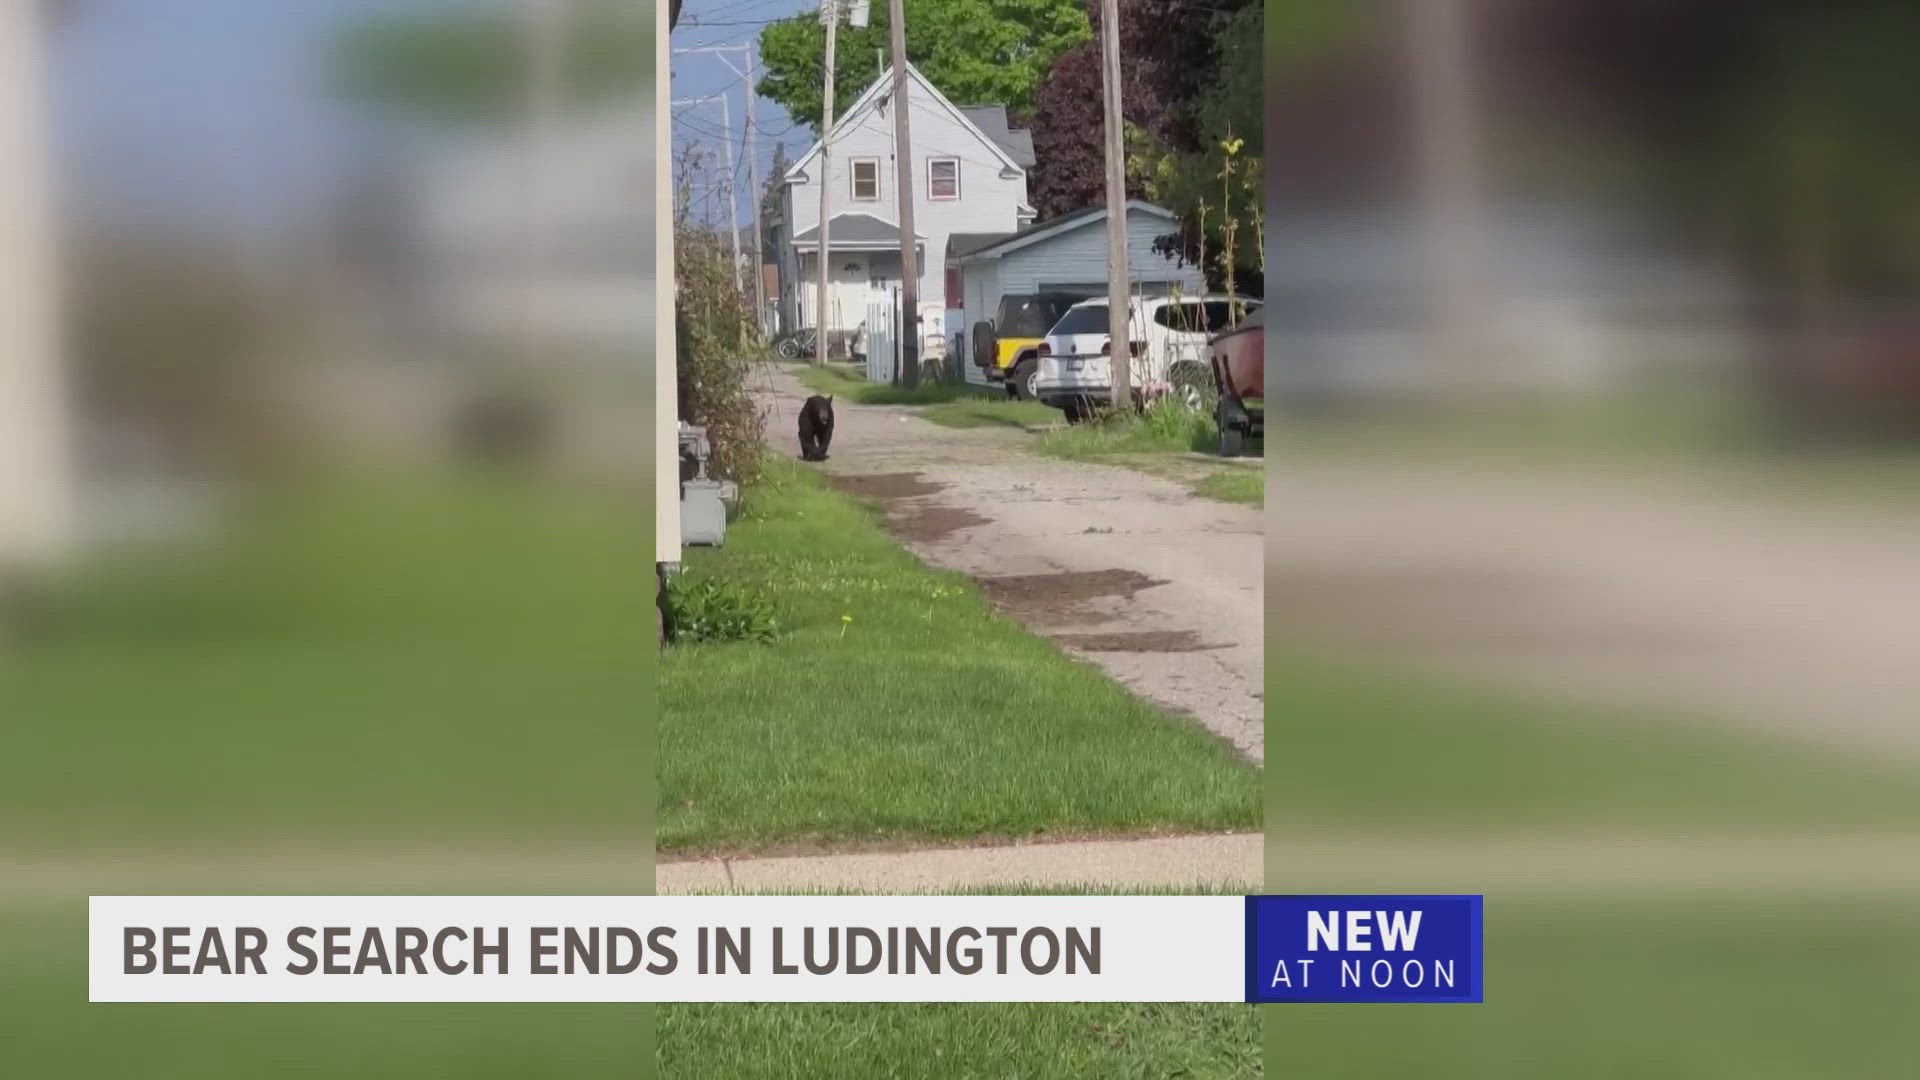 Some neighbors in Ludington shared an eventful morning when they saw a black bear walking around north of downtown Thursday.